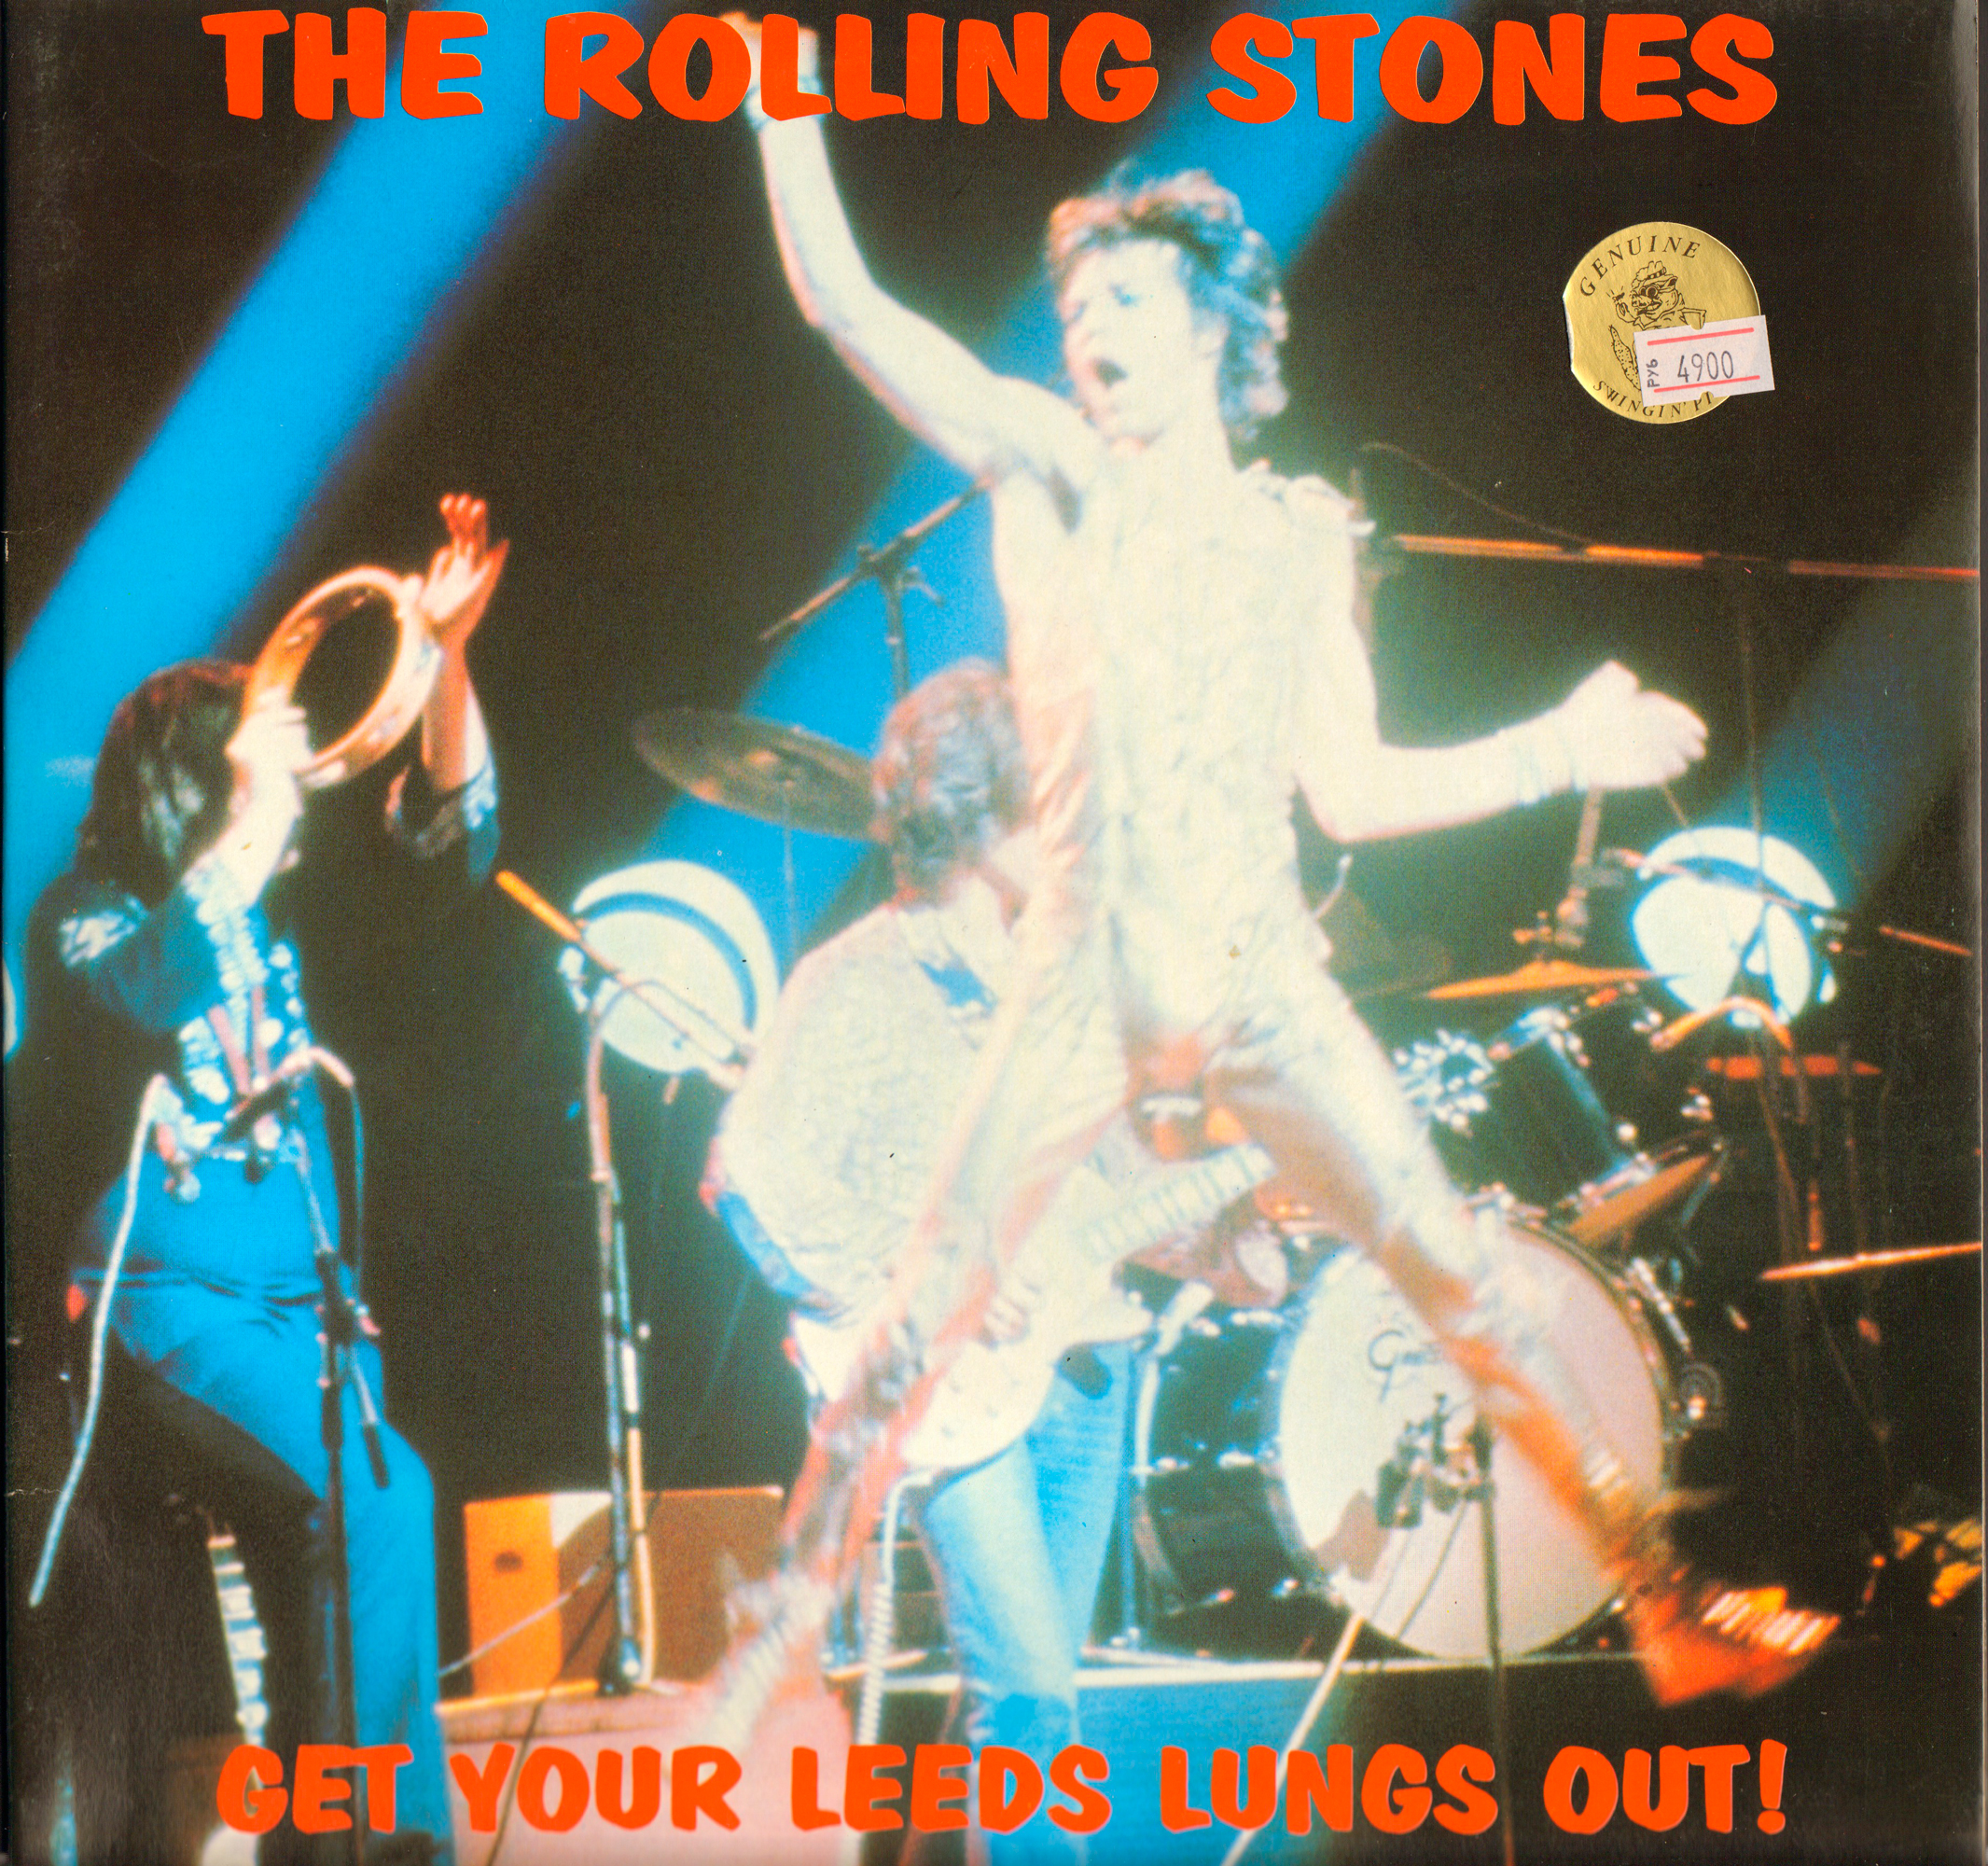 Rolling stones get. Роллинг стоунз пластинки. Sing out lungs текст. Get yer ya-ya's out! The Rolling Stones in Concert the Rolling Stones.